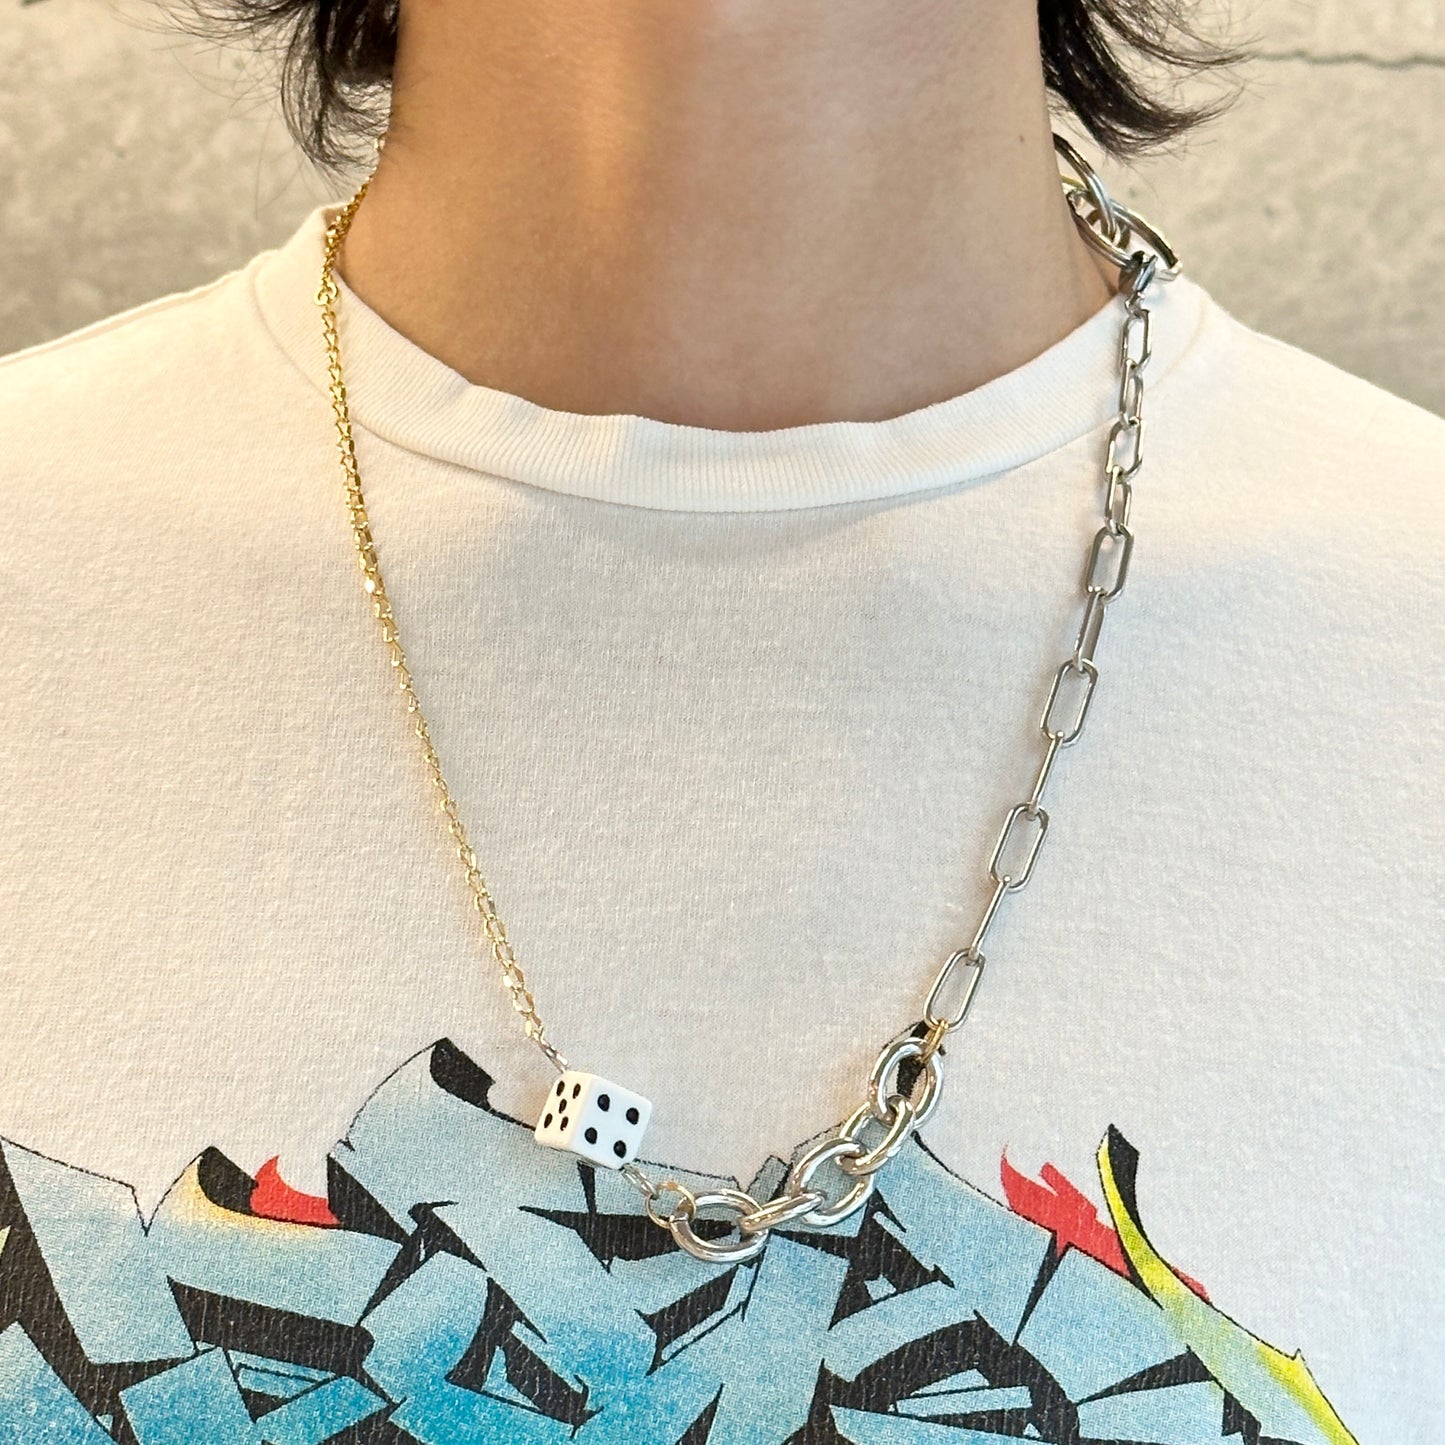 BLESS / MATERIALMIX NECKLACE "DICE"